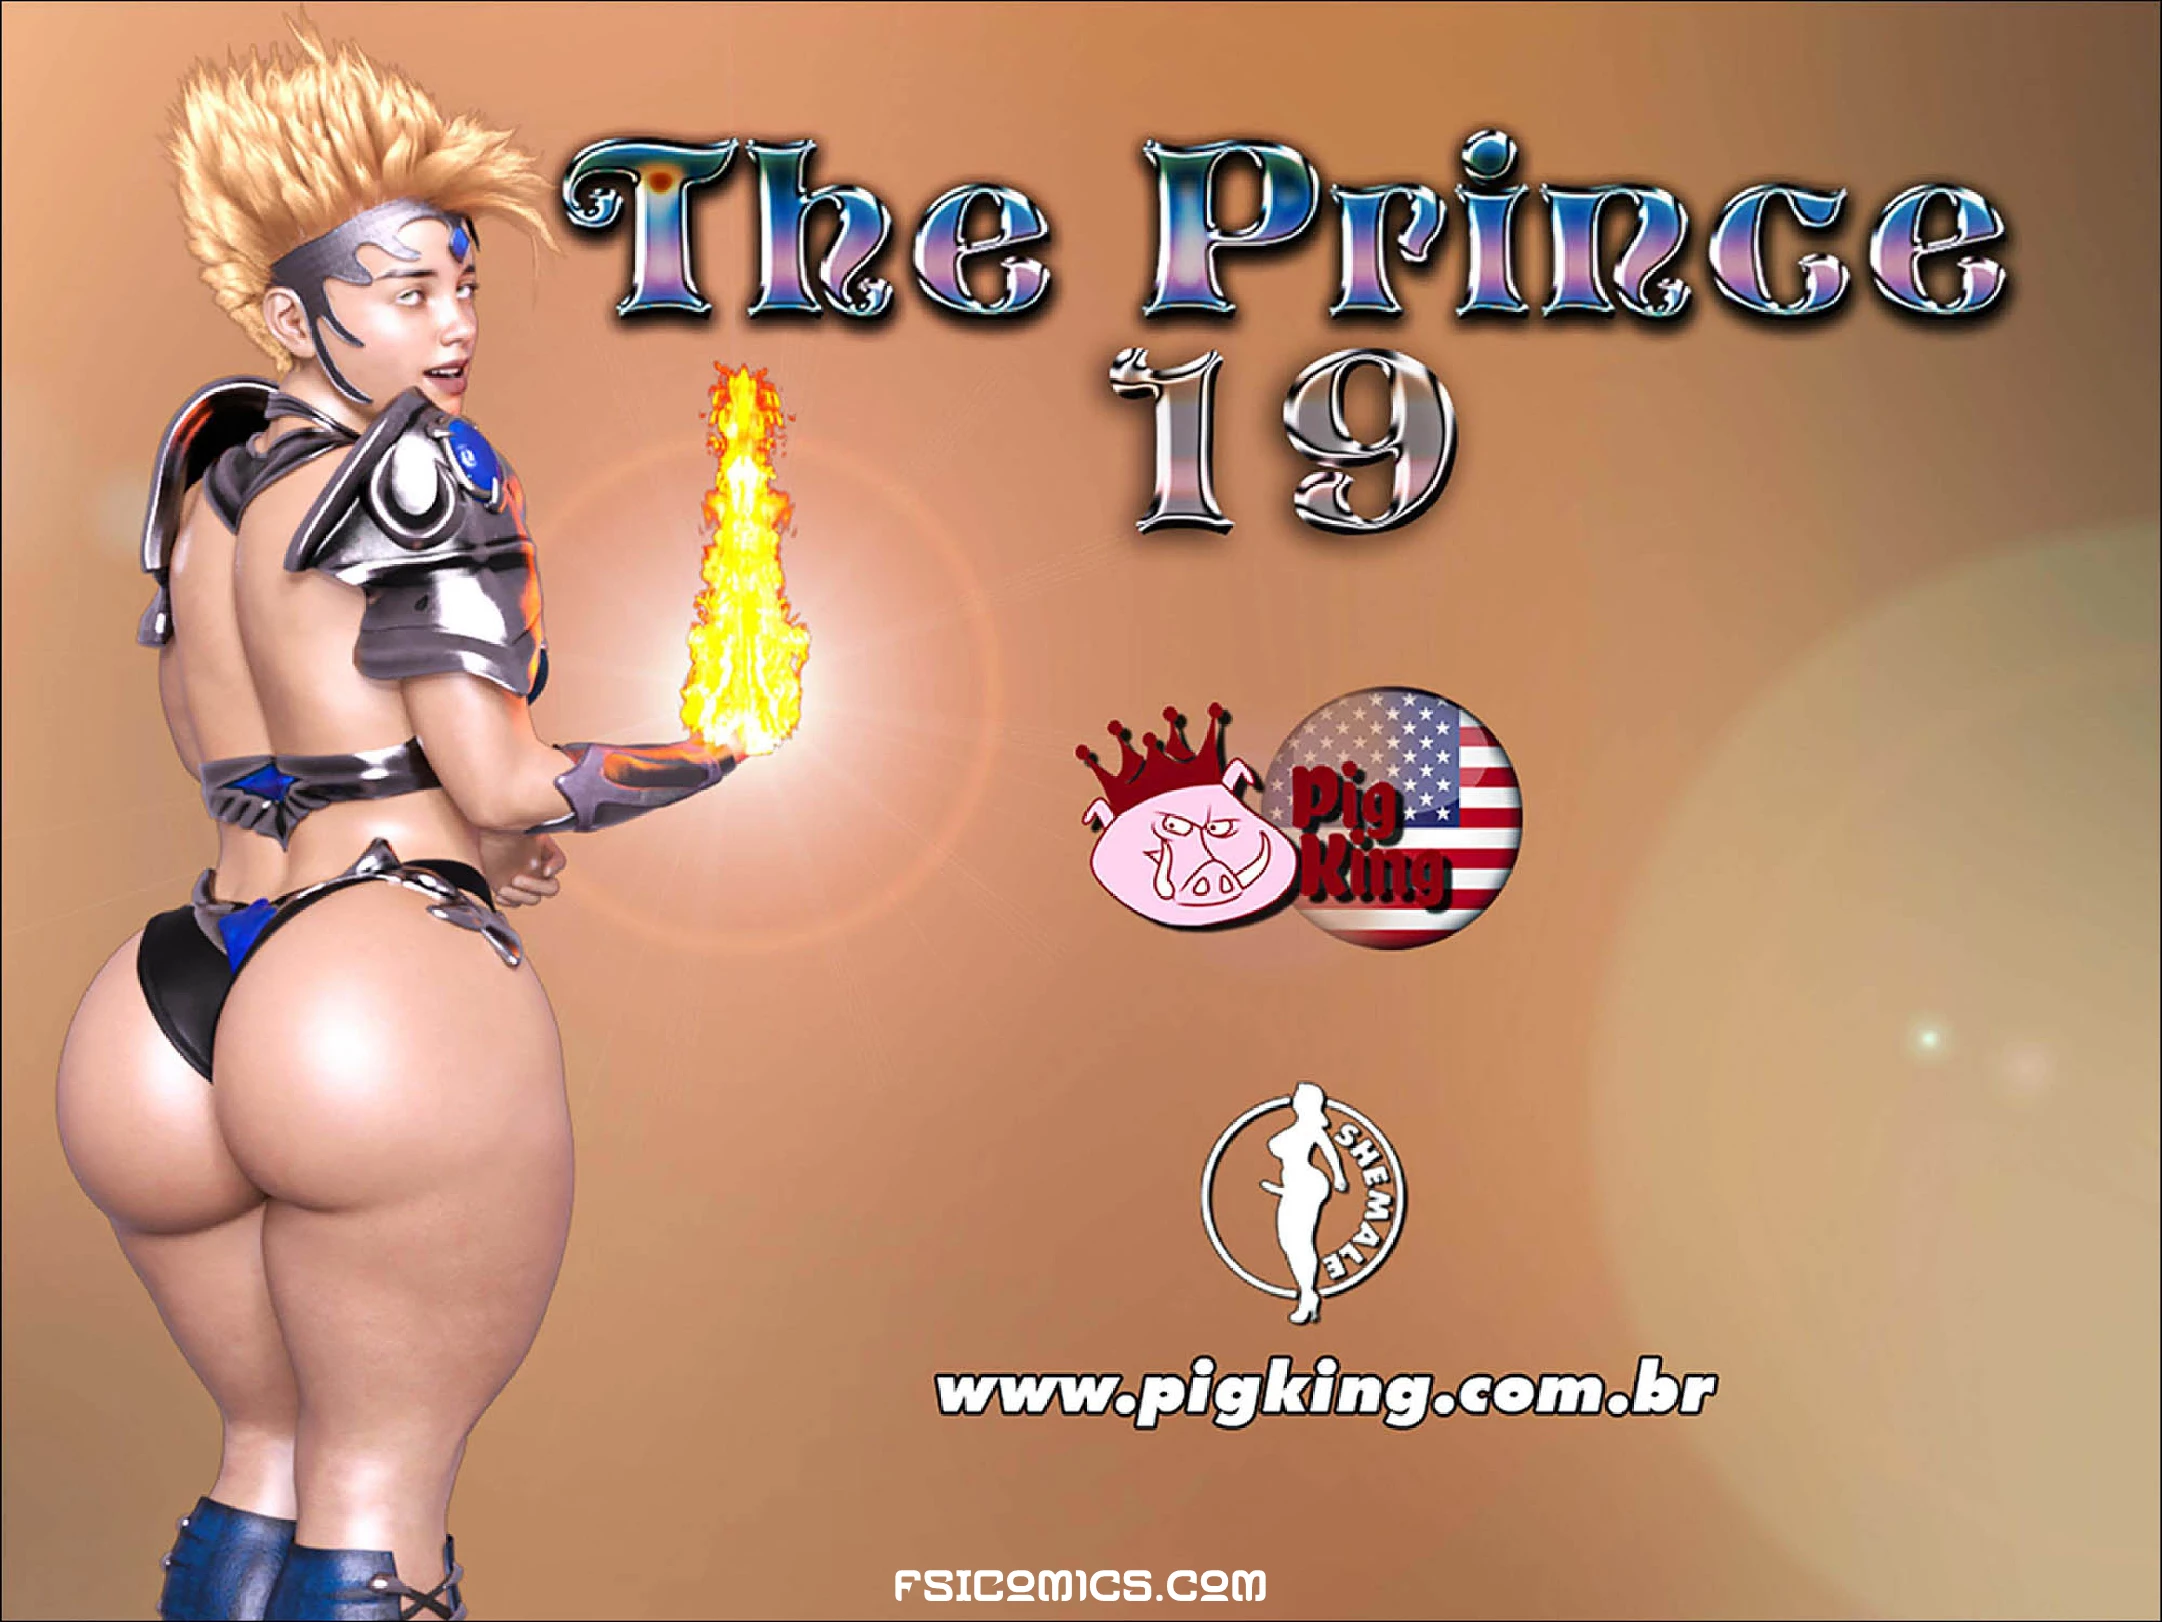 The Prince Chapter 19 – PigKing - 243 - FSIComics